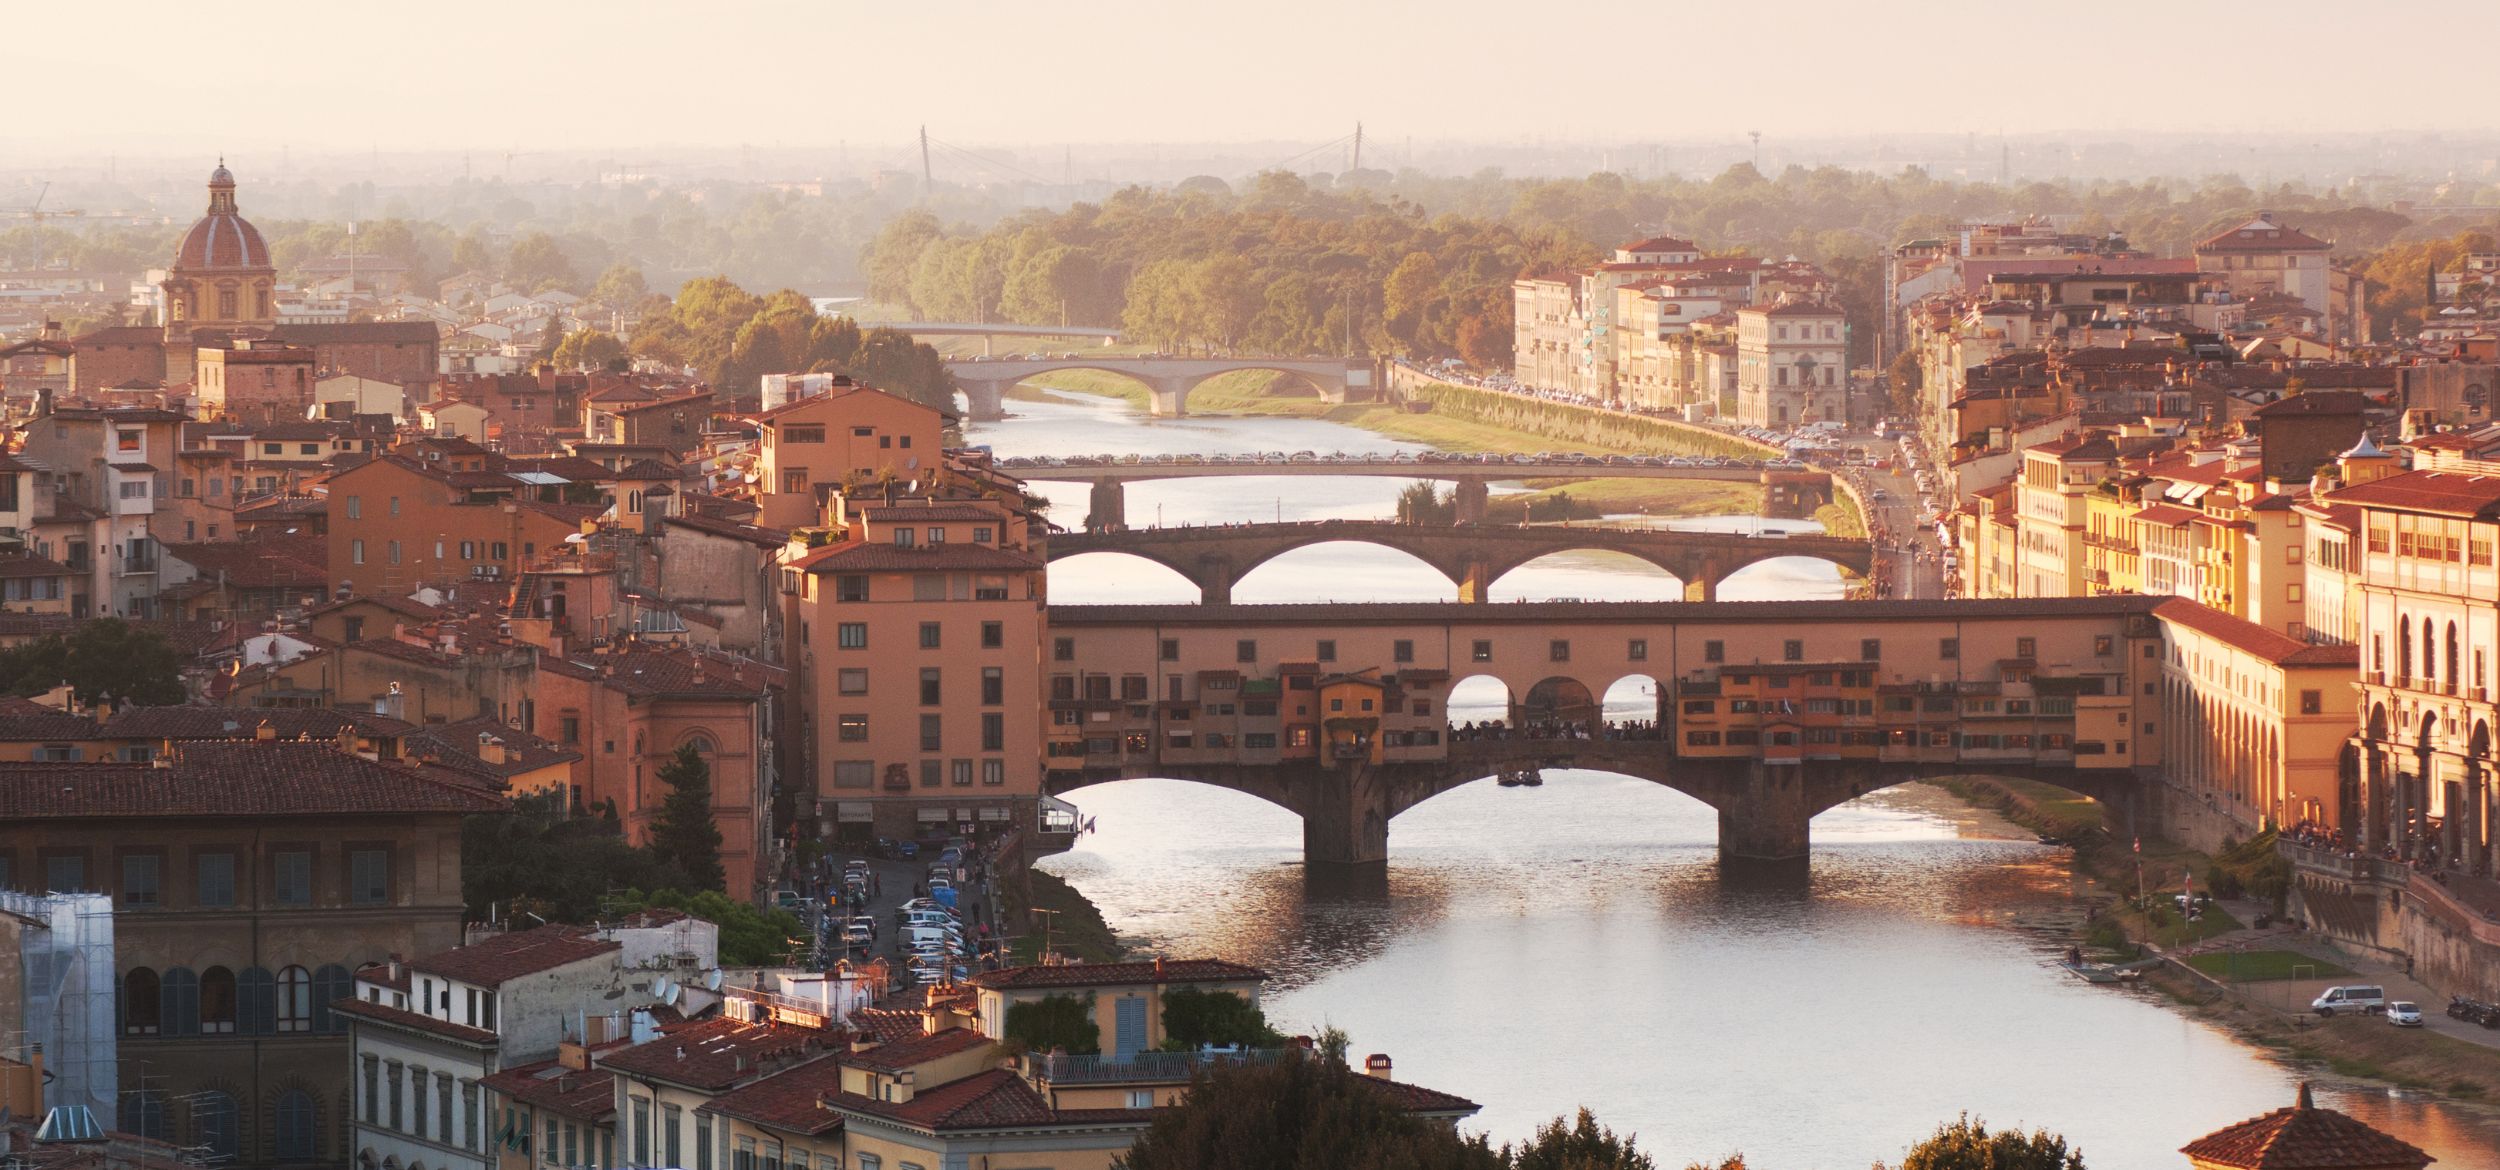 View of the Ponte Vecchio seen from Piazzale Michelangelo, in Florence Italy.